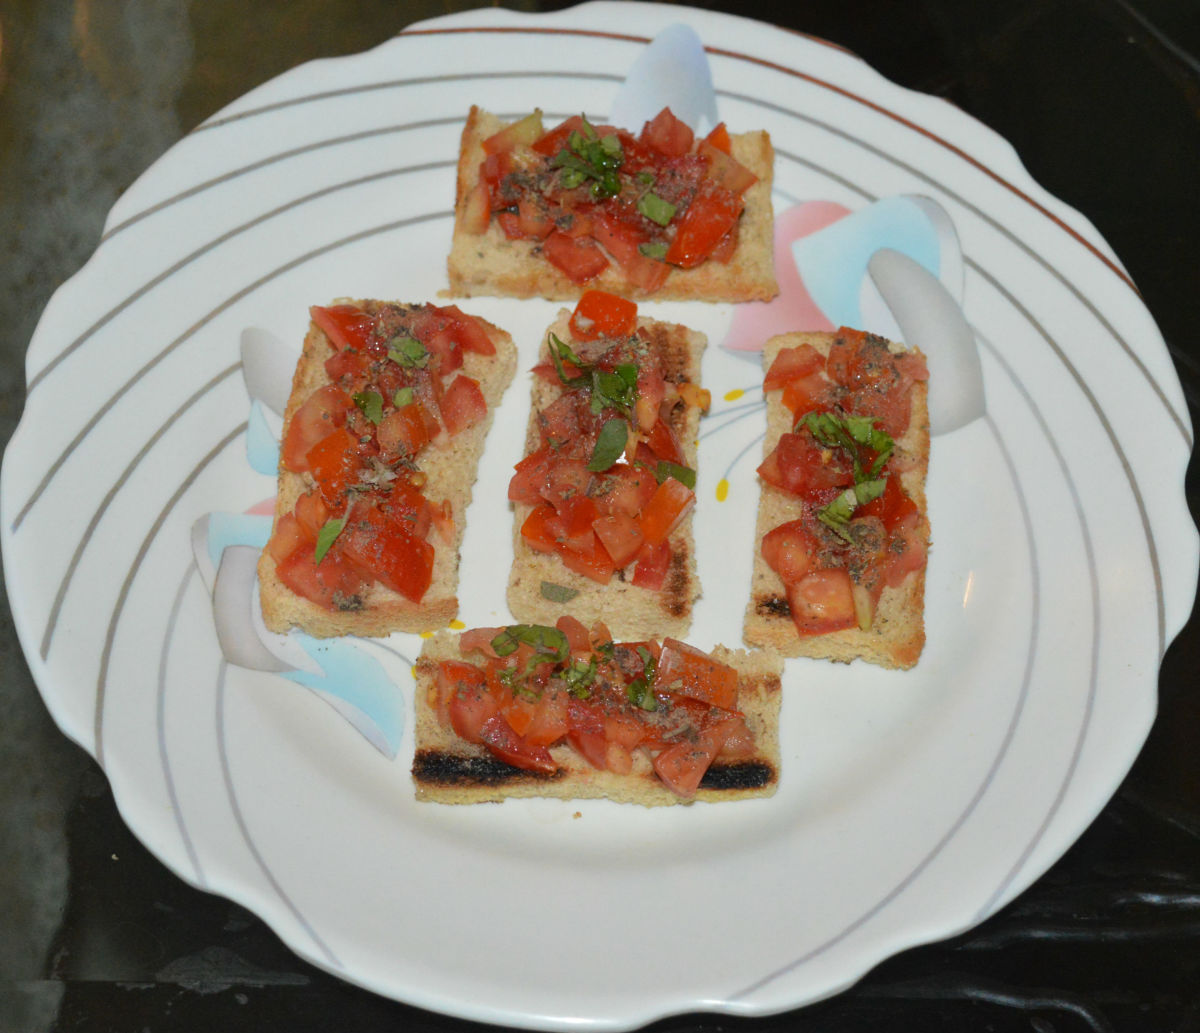 Your favorite Italian tomato basil bruschetta  is ready to serve! Serve immediately. Enjoy the crunchy,  flavorful, and delicious snack!